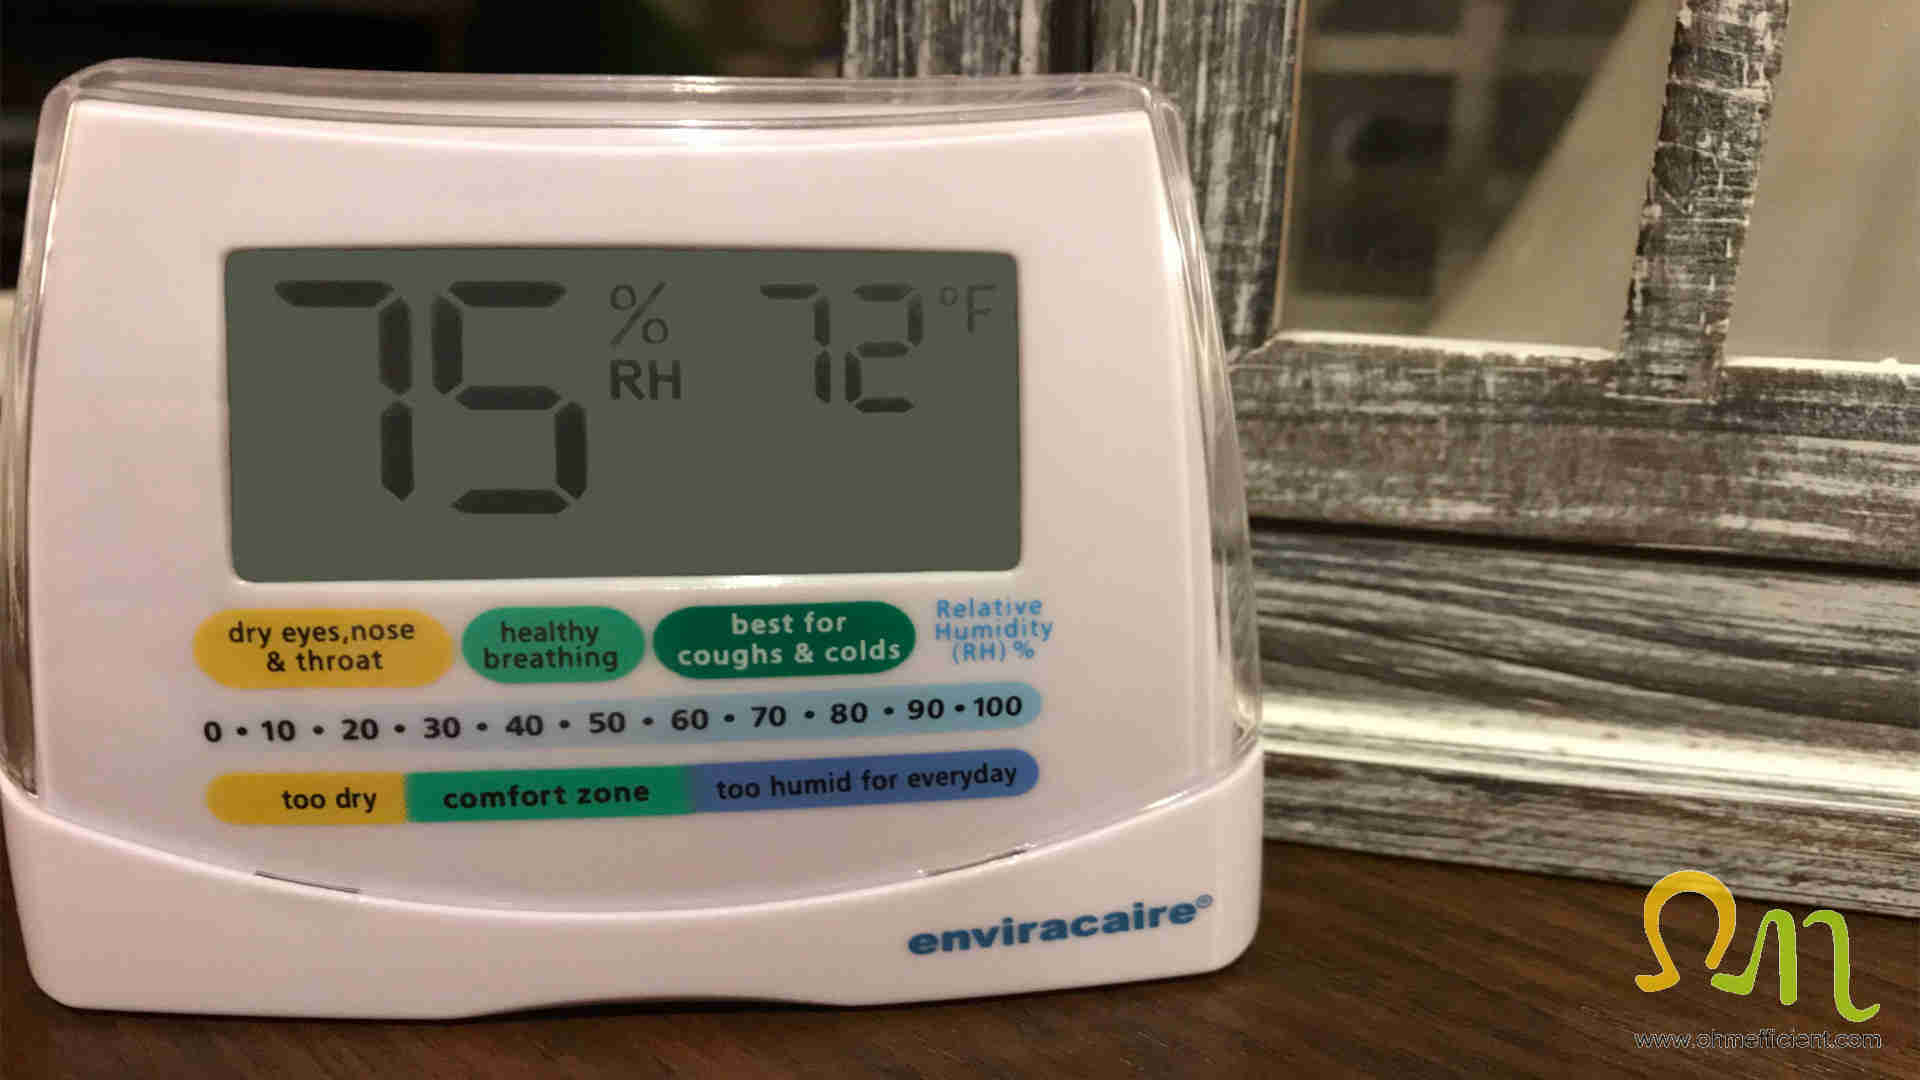 Accuracy of Nest Room Thermostat Humidity Indicator